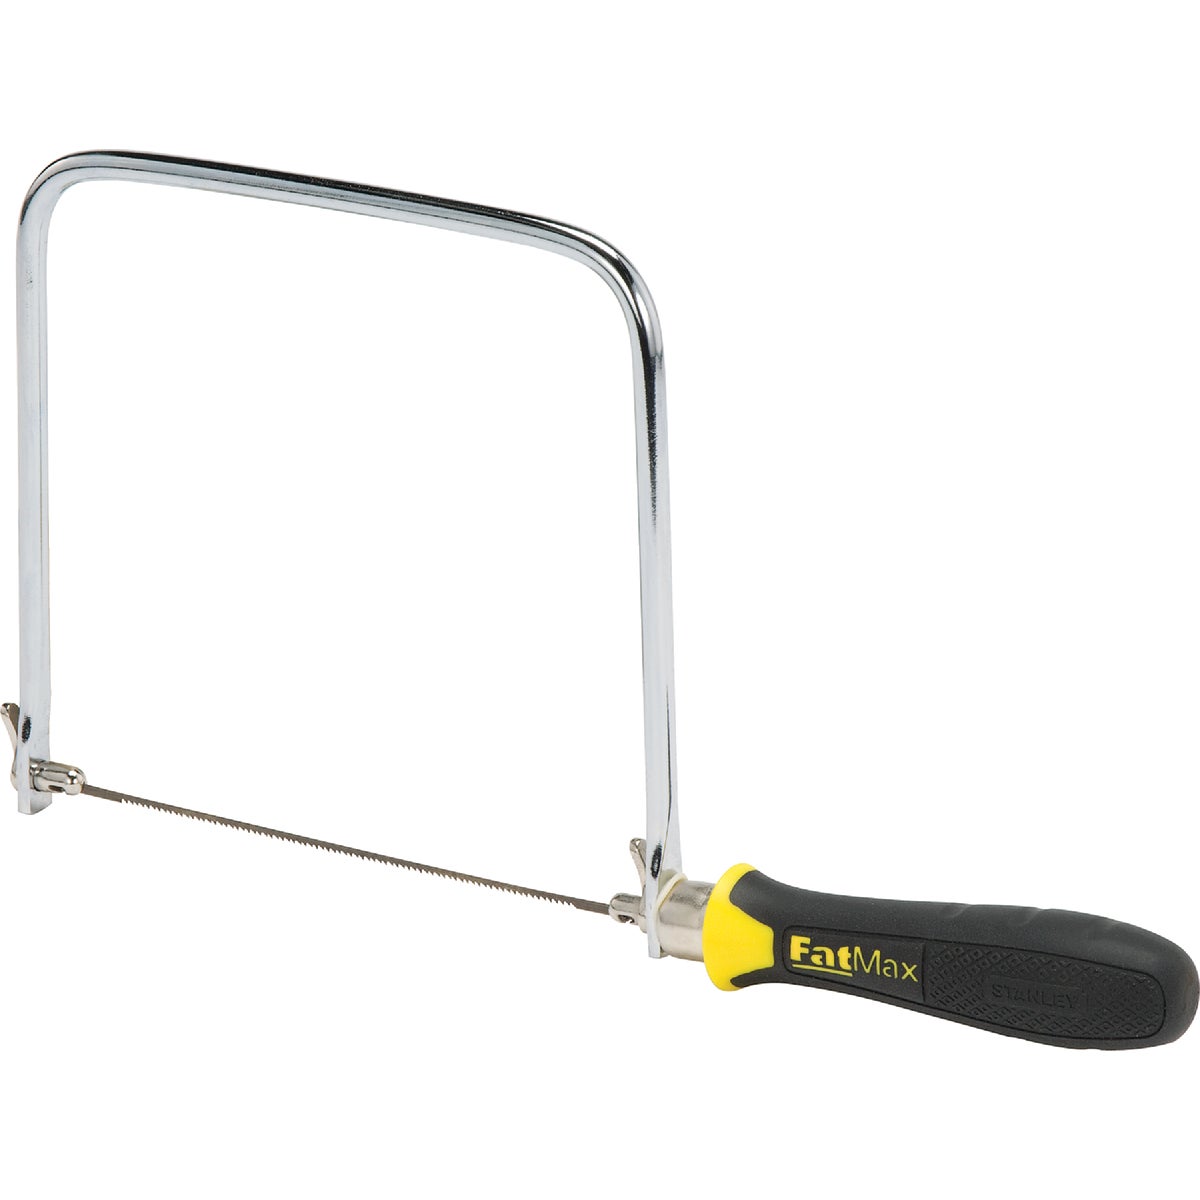 Stanley 6-1/2 In. Coping Saw